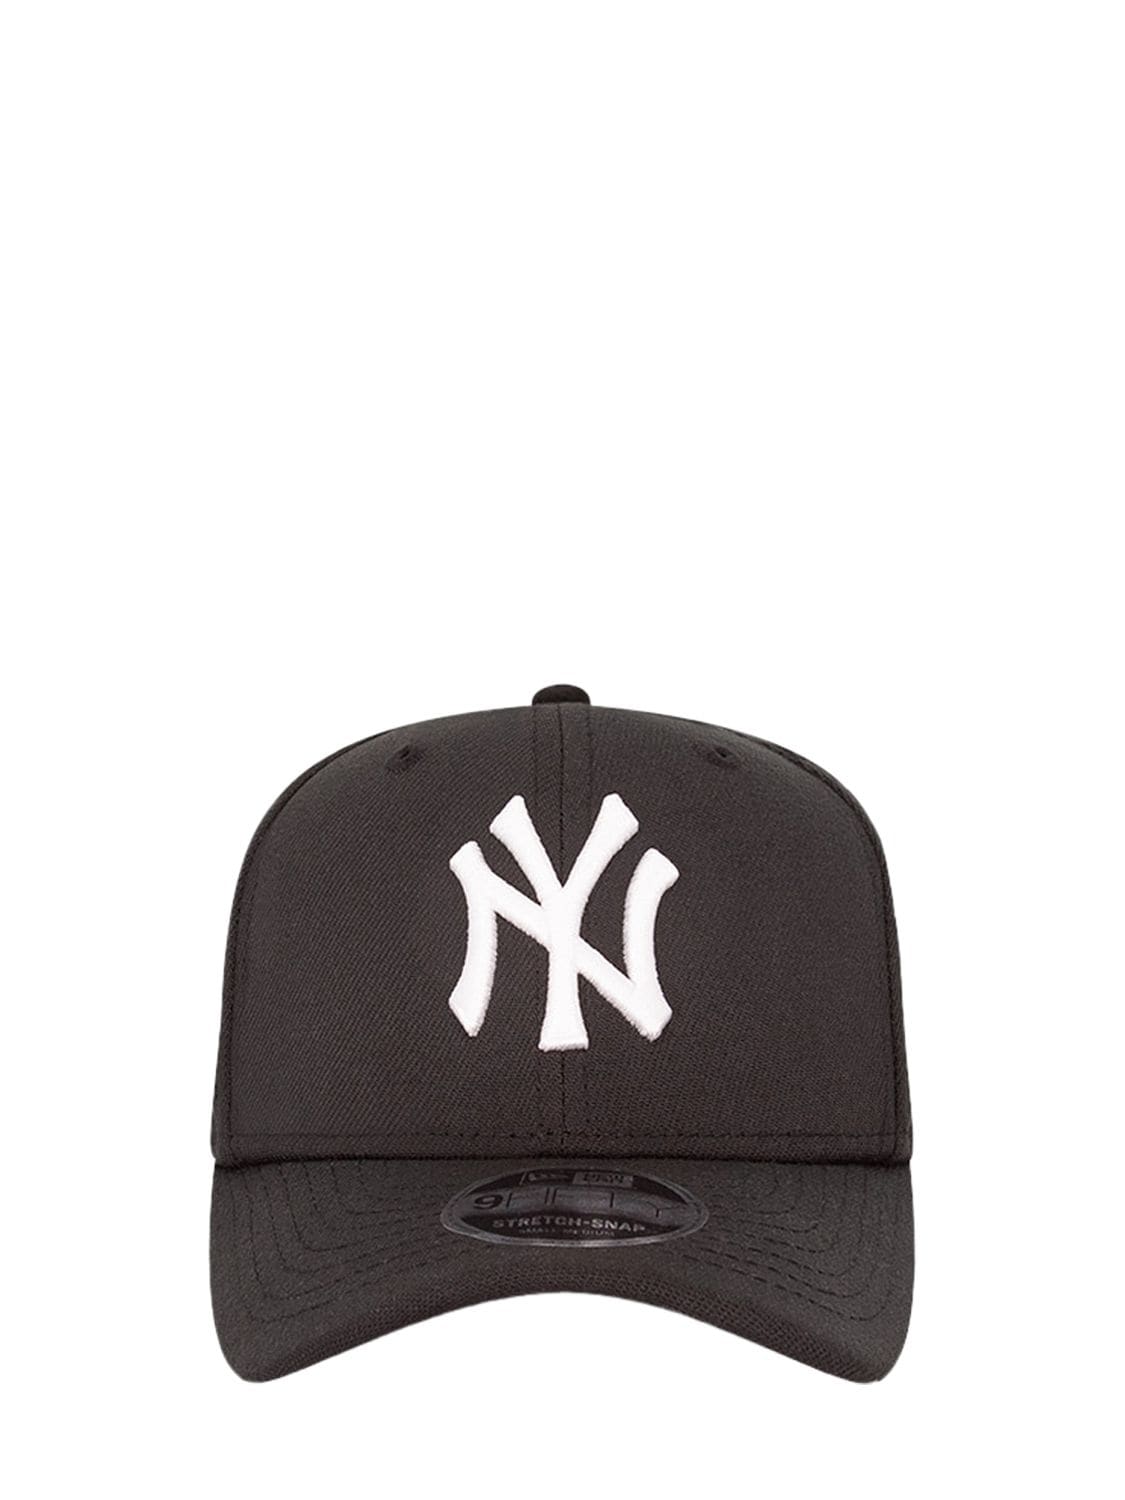 New Era 9fifty Stretch Snap Yankees Hat In Black